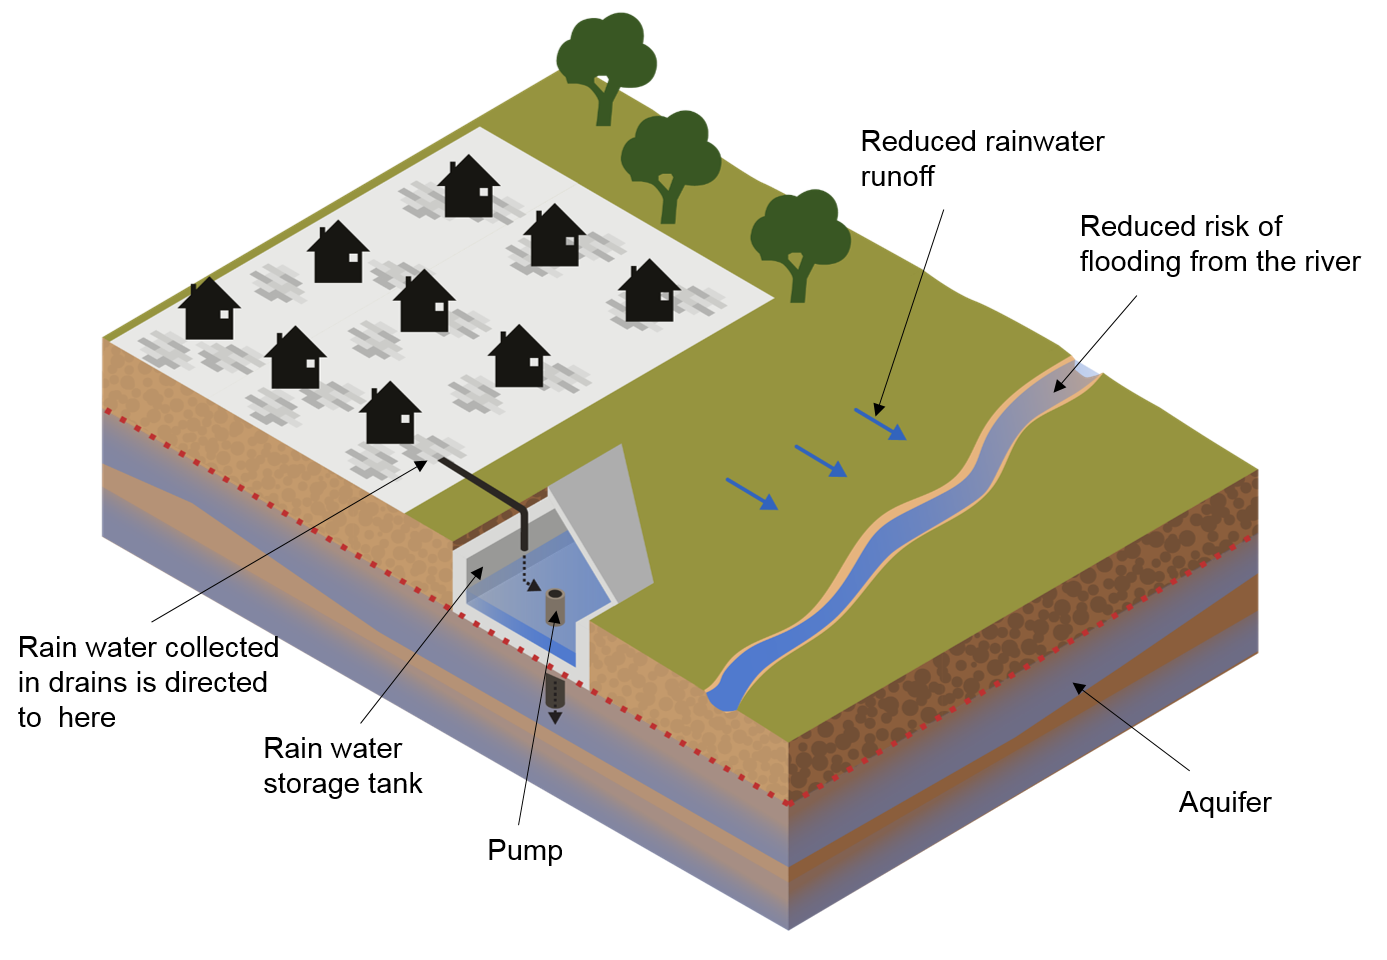 In the top part of the image there is a built-up area on a hard surface with drainage. The left of the image, below the built-up area is a rainwater storage tank which collects the water from the drains and pump. The image shows different levels in the ground and where rainwater collected in the storage tank may be redirected including an underground layer of water-bearing permeable rock known as aquifer. The rainwater runoff is shown by arrows from the built-up area toward the river which flows across the lower part of the image from left to right indicating a reduced runoff and reduced risk of flooding from the river.